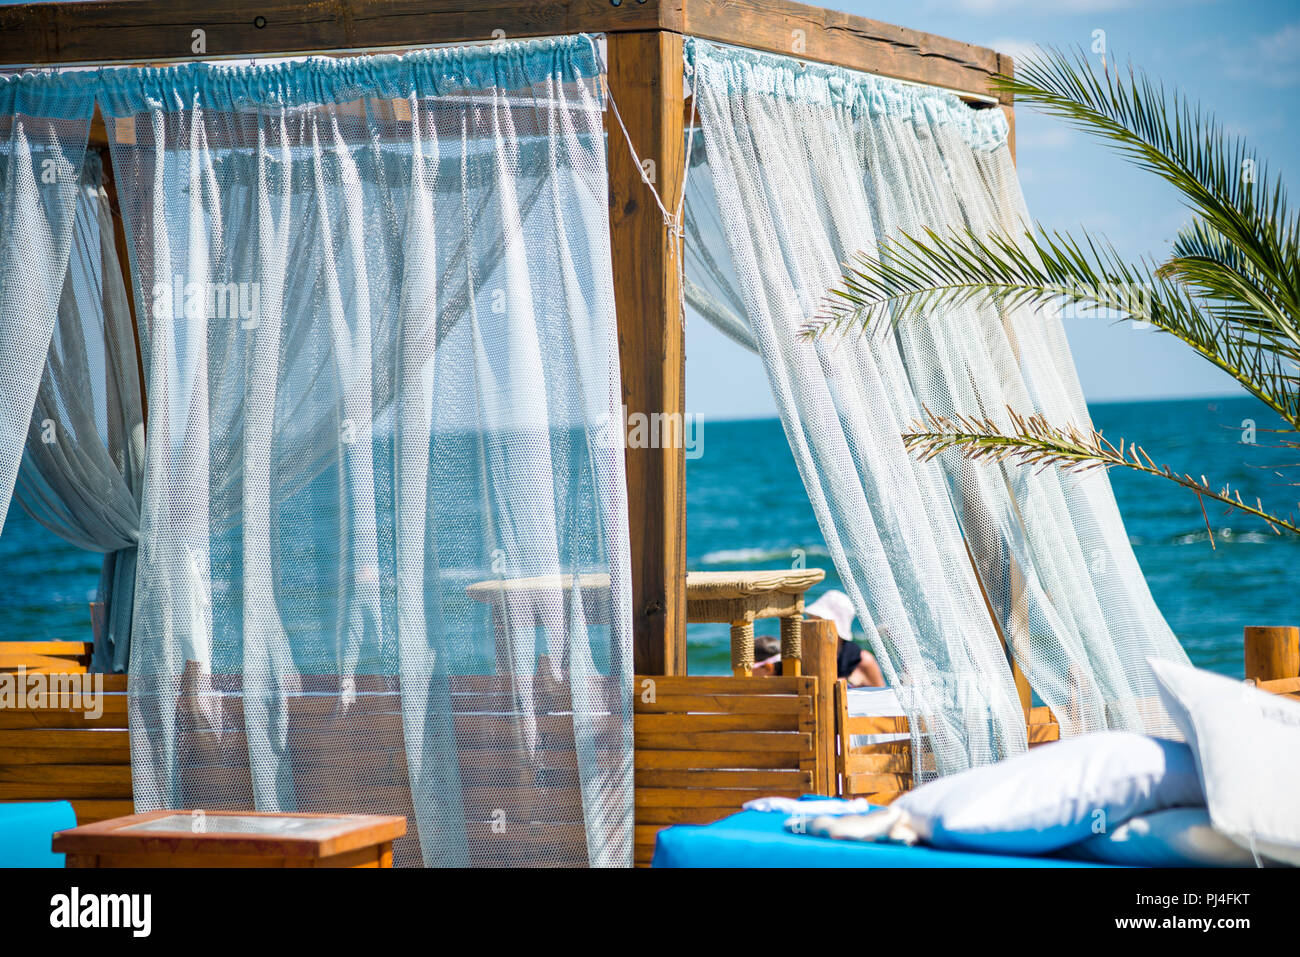 Beach bed and sunloungers in a beach with white sand Stock Photo